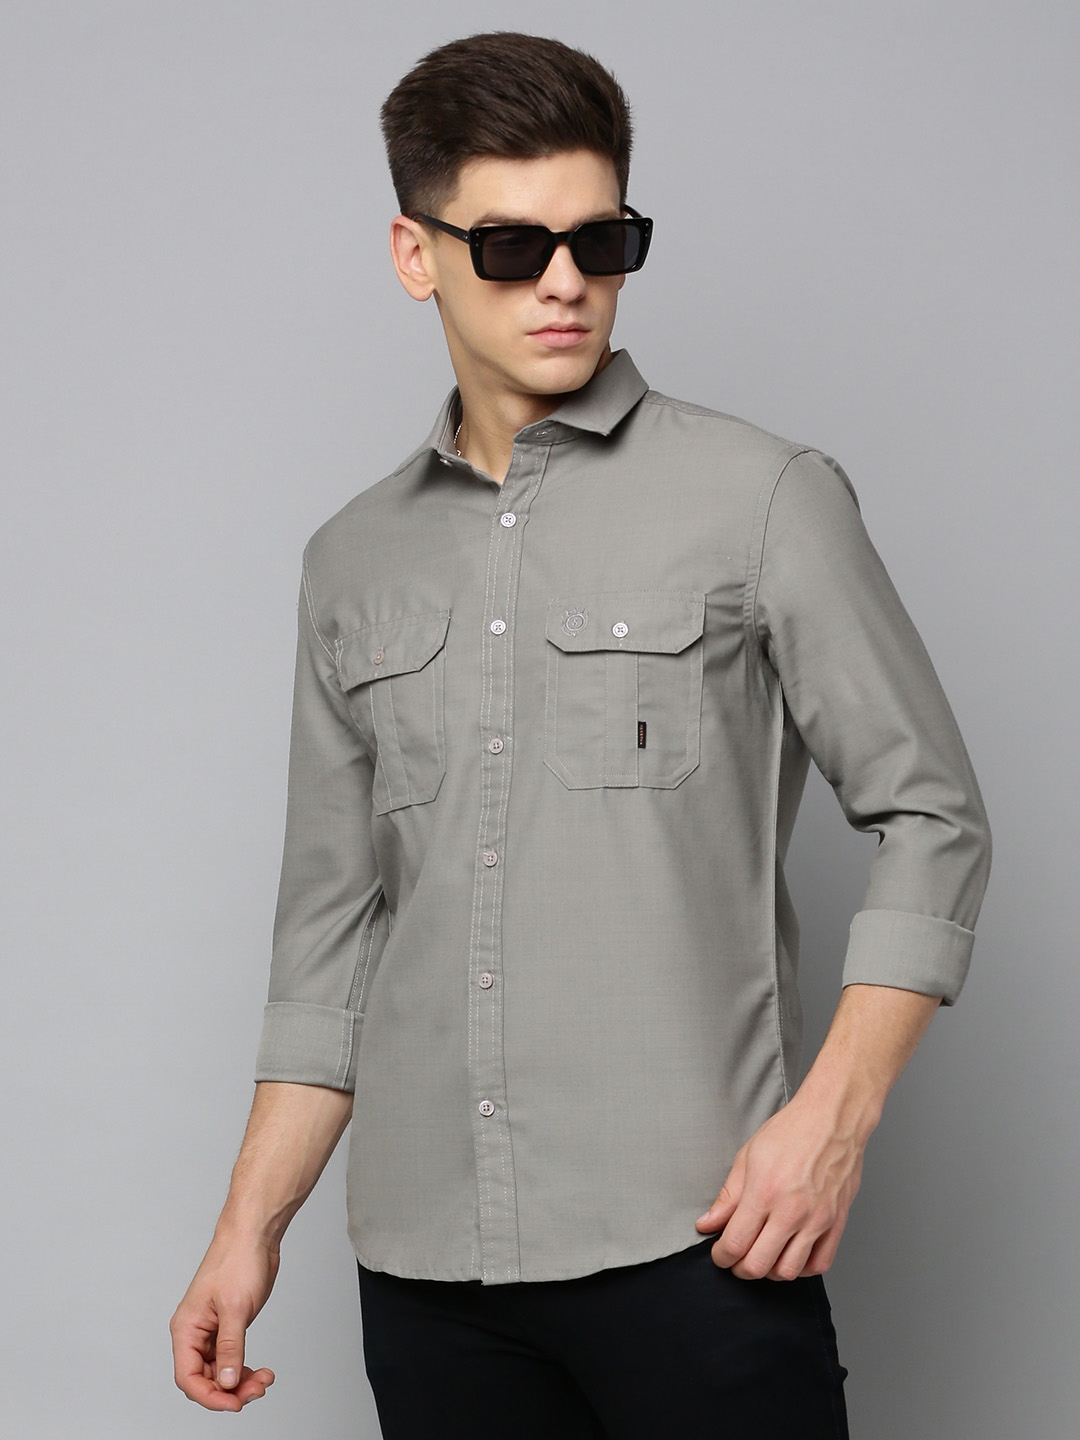 SHOWOFF Men's Spread Collar Solid Taupe Regular Fit Shirt